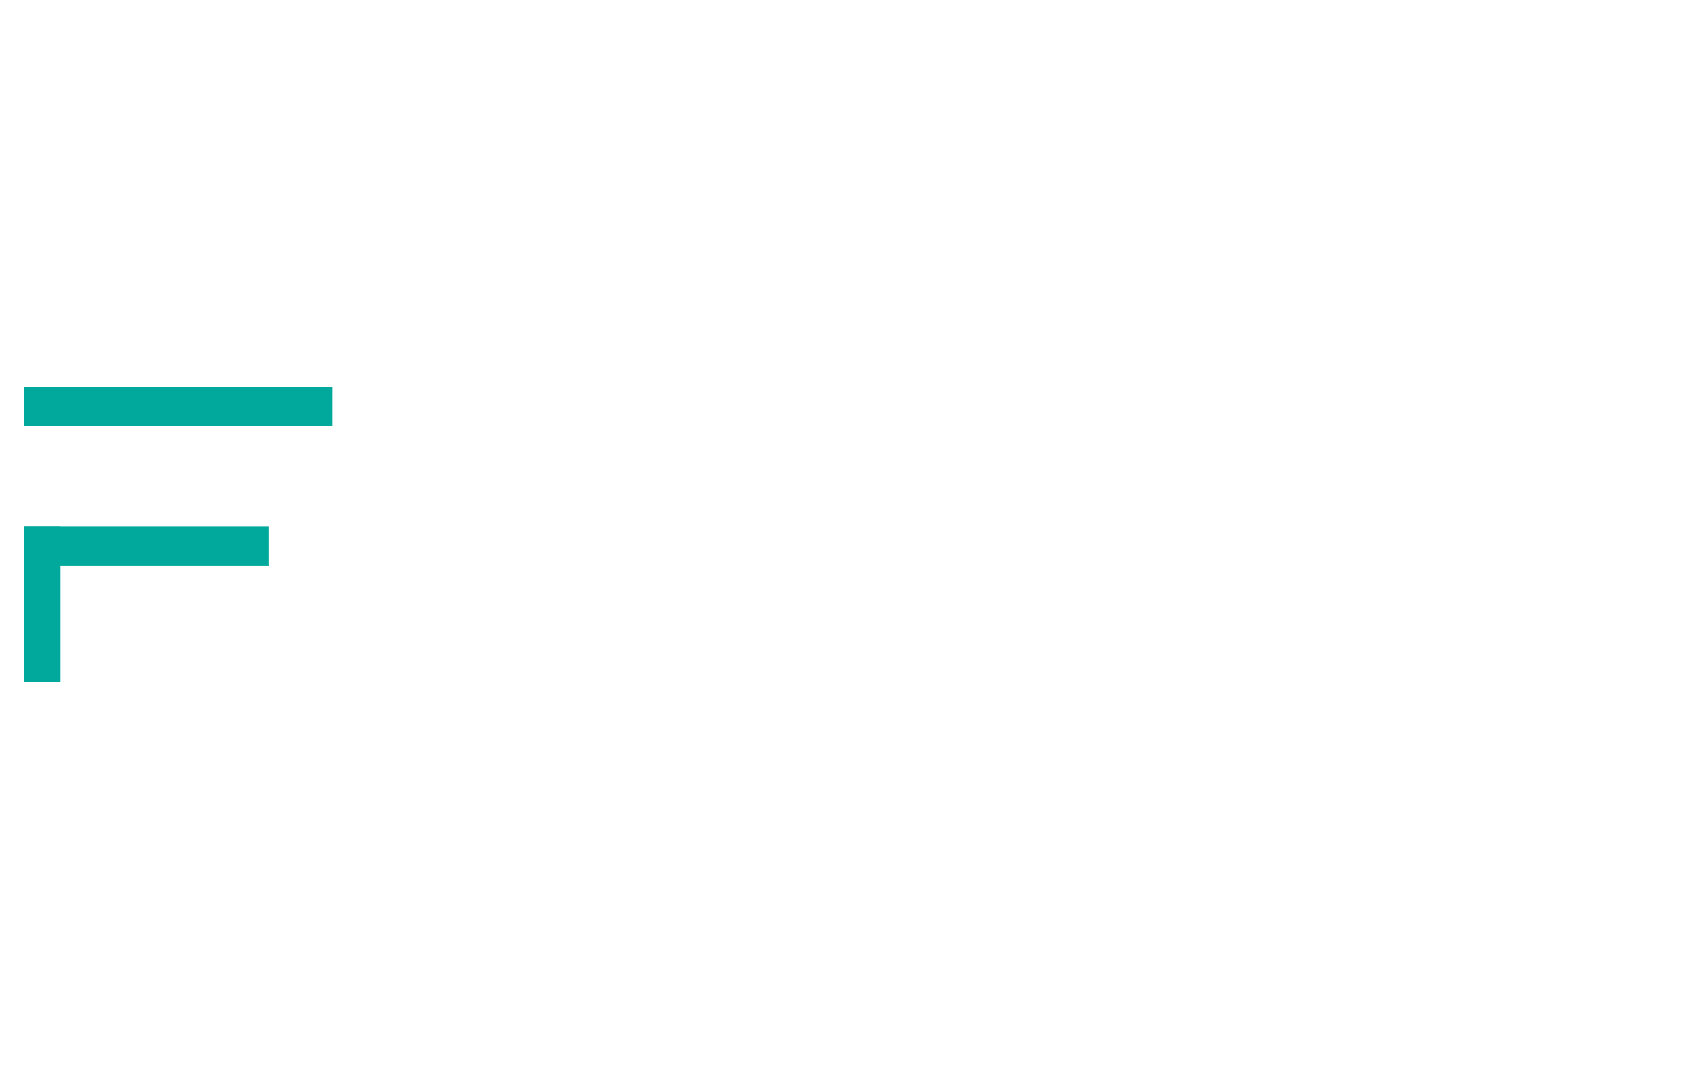 First Phase Credit Card.png